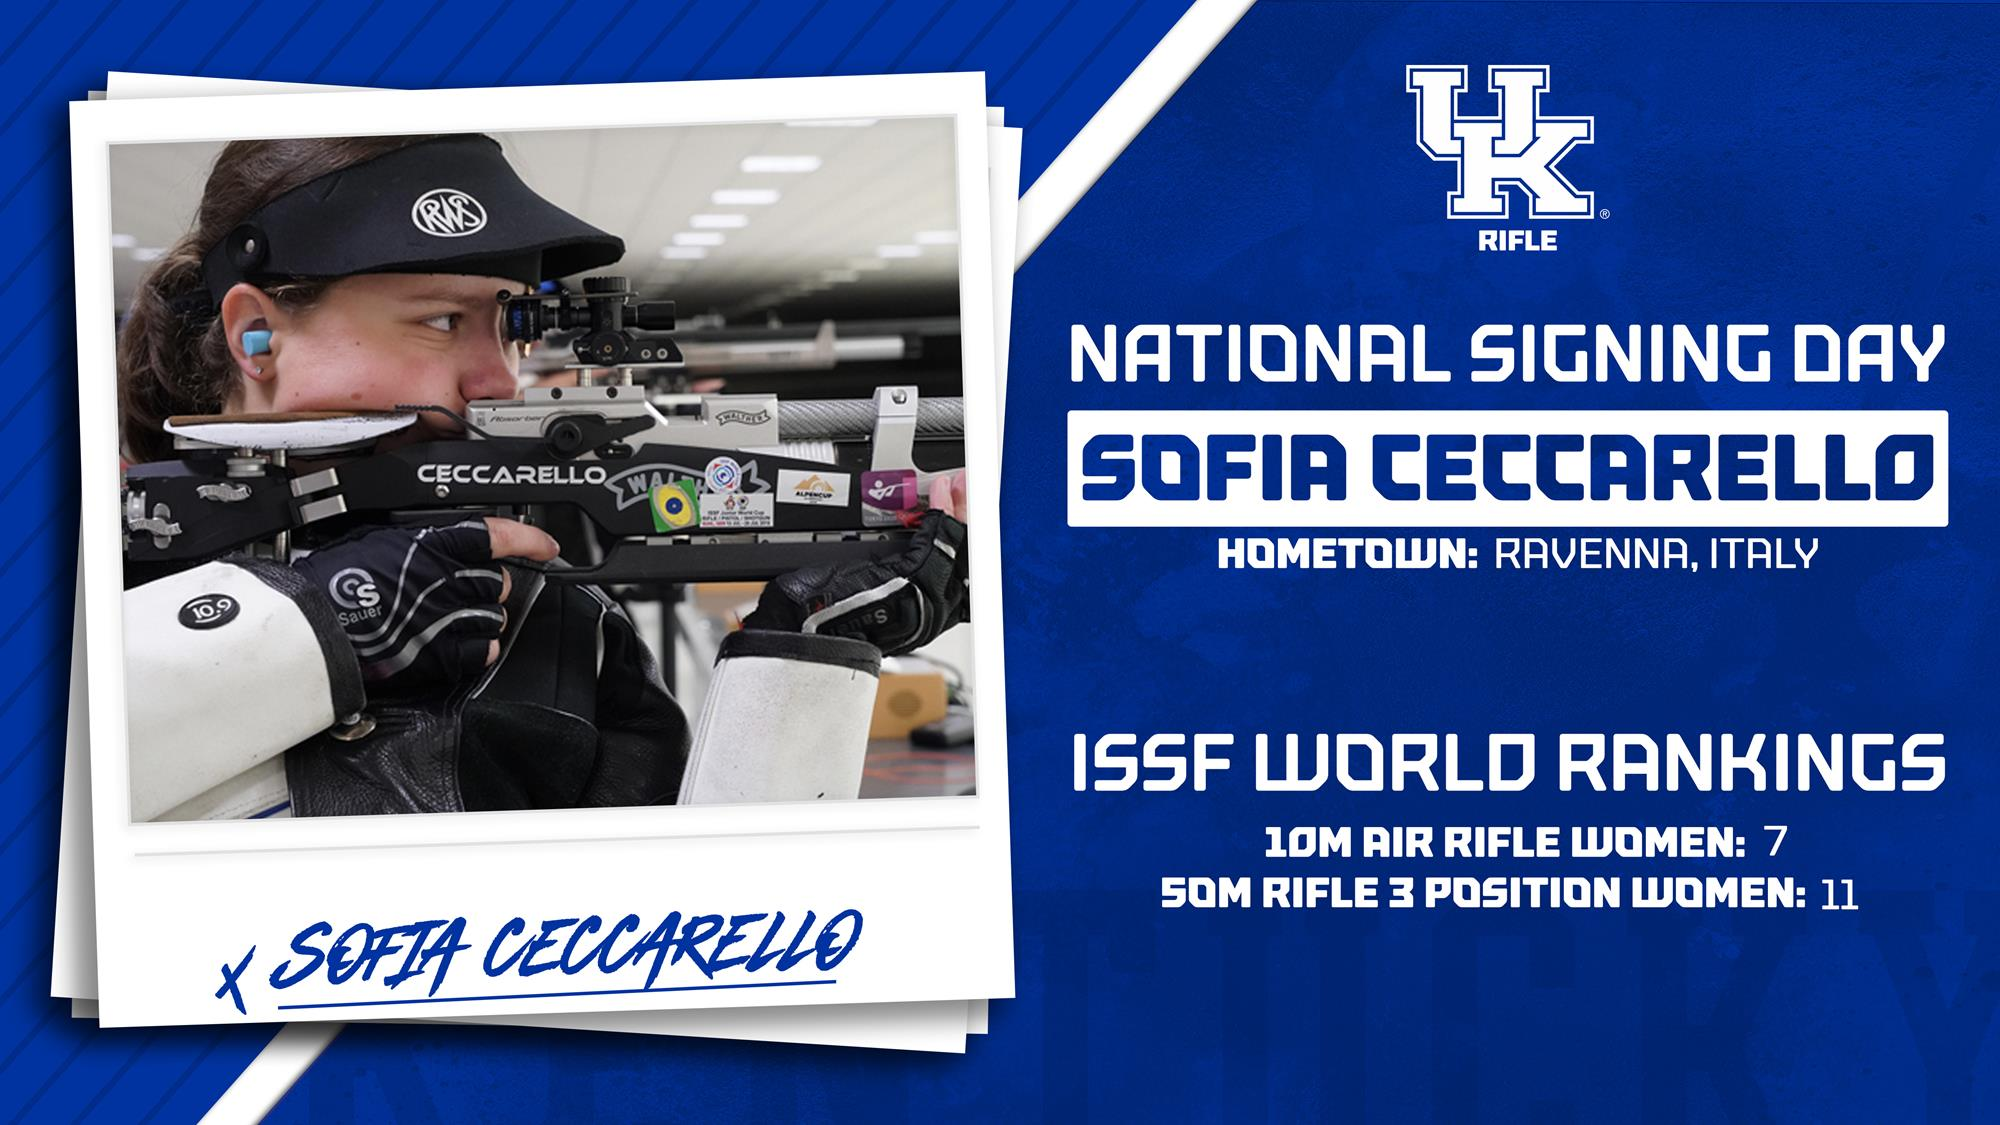 Rifle Signs Olympian Sofia Ceccarello to National Letter of Intent